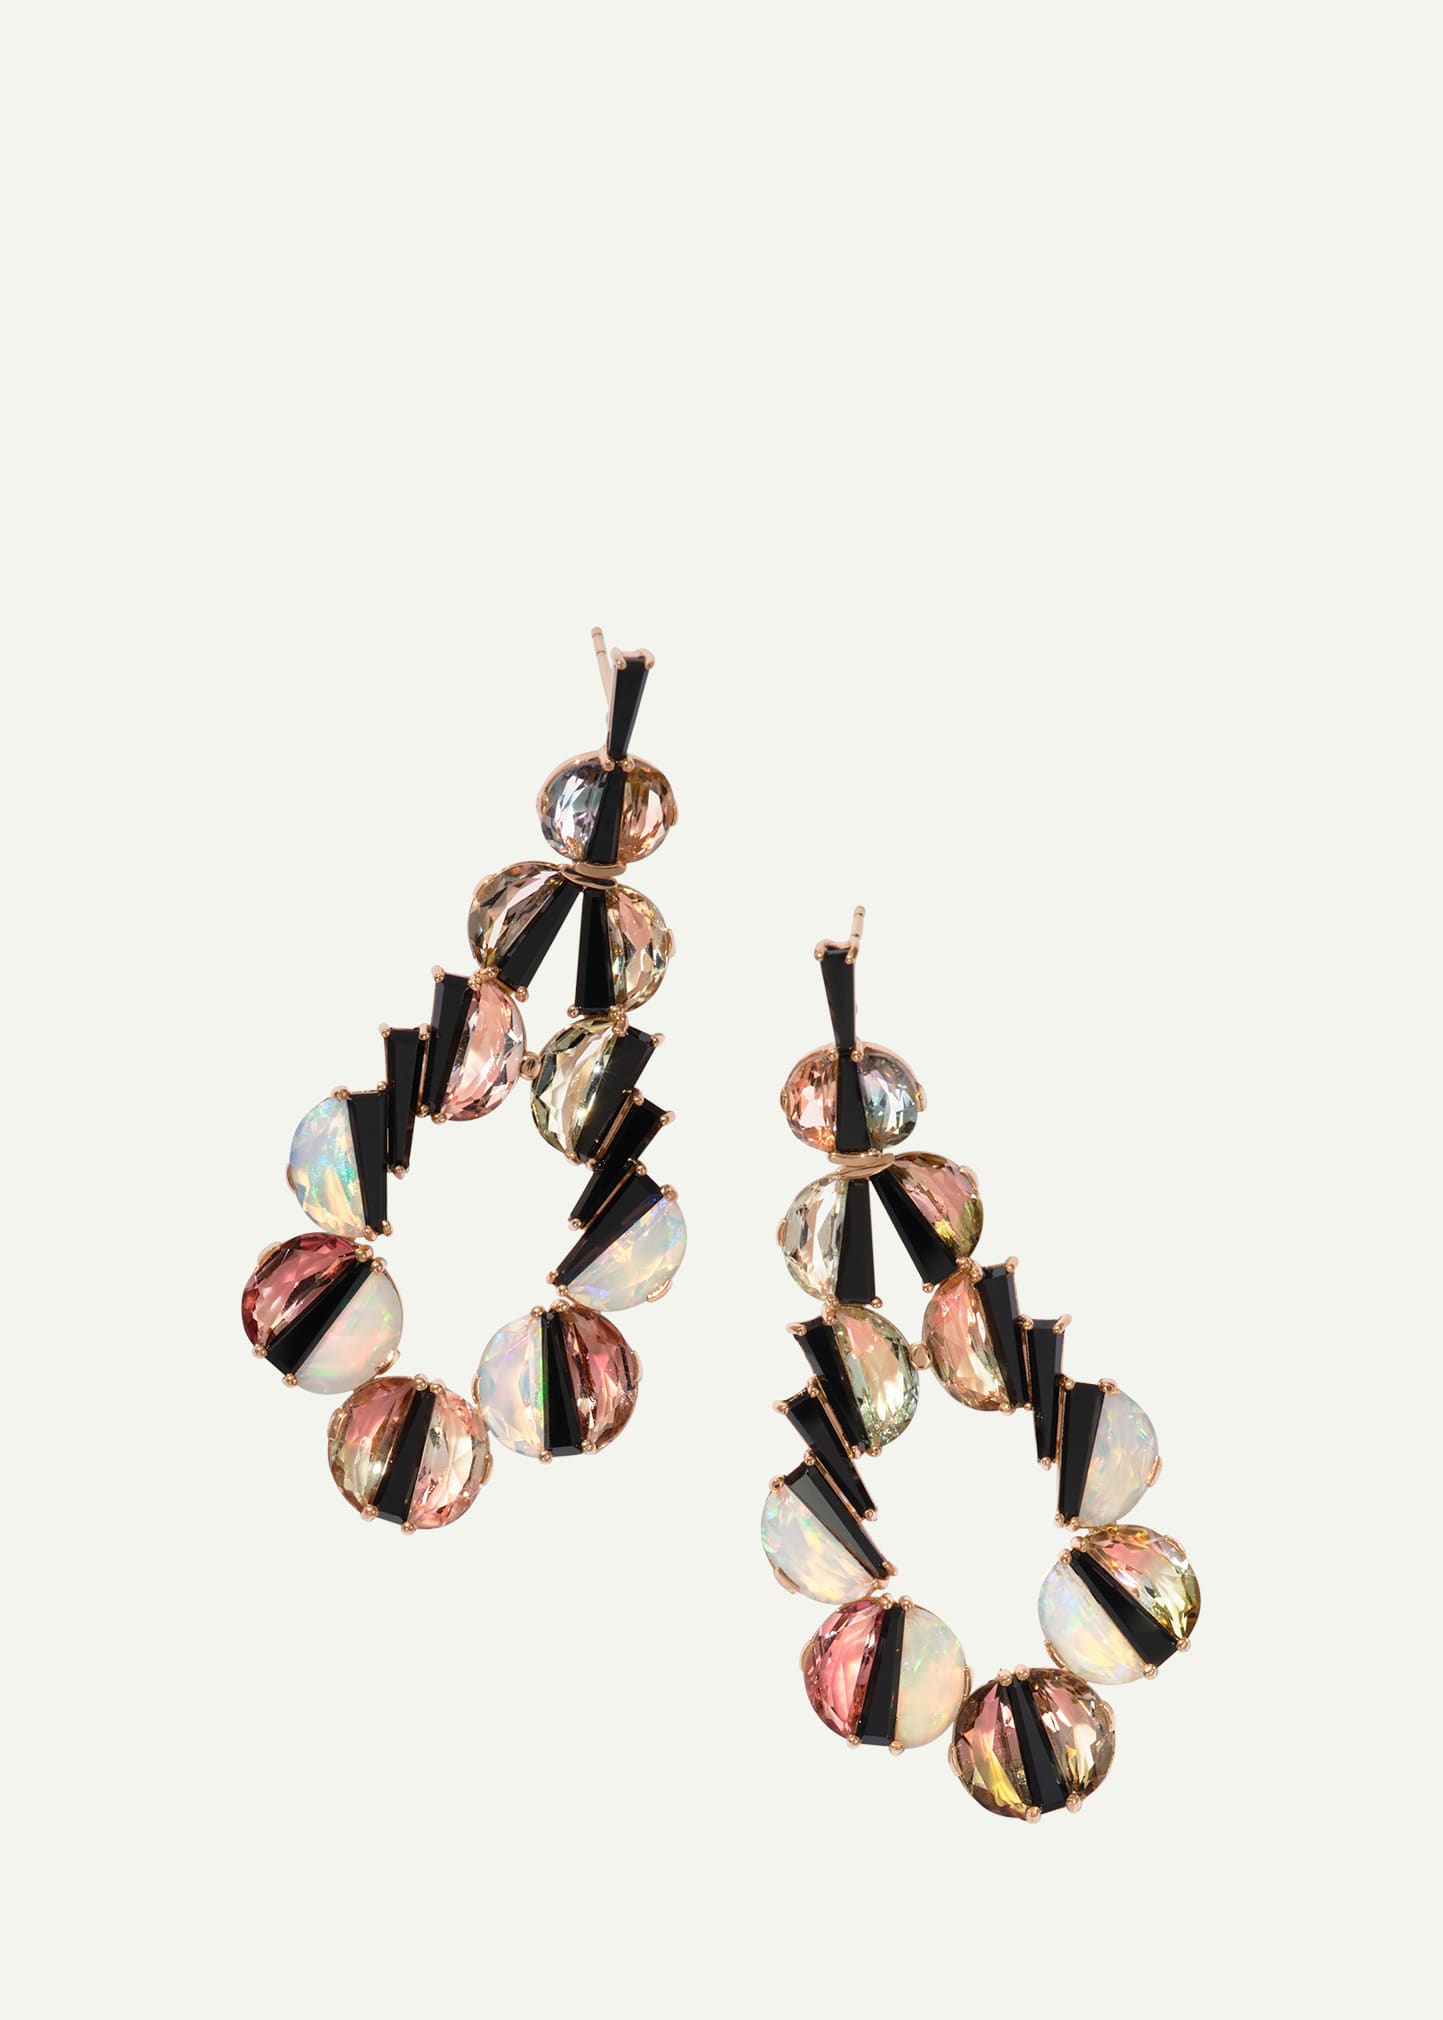 20K Rose Gold Torero Earrings with Bicolor Tourmaline, Black Spinel and Ethiopian Opal